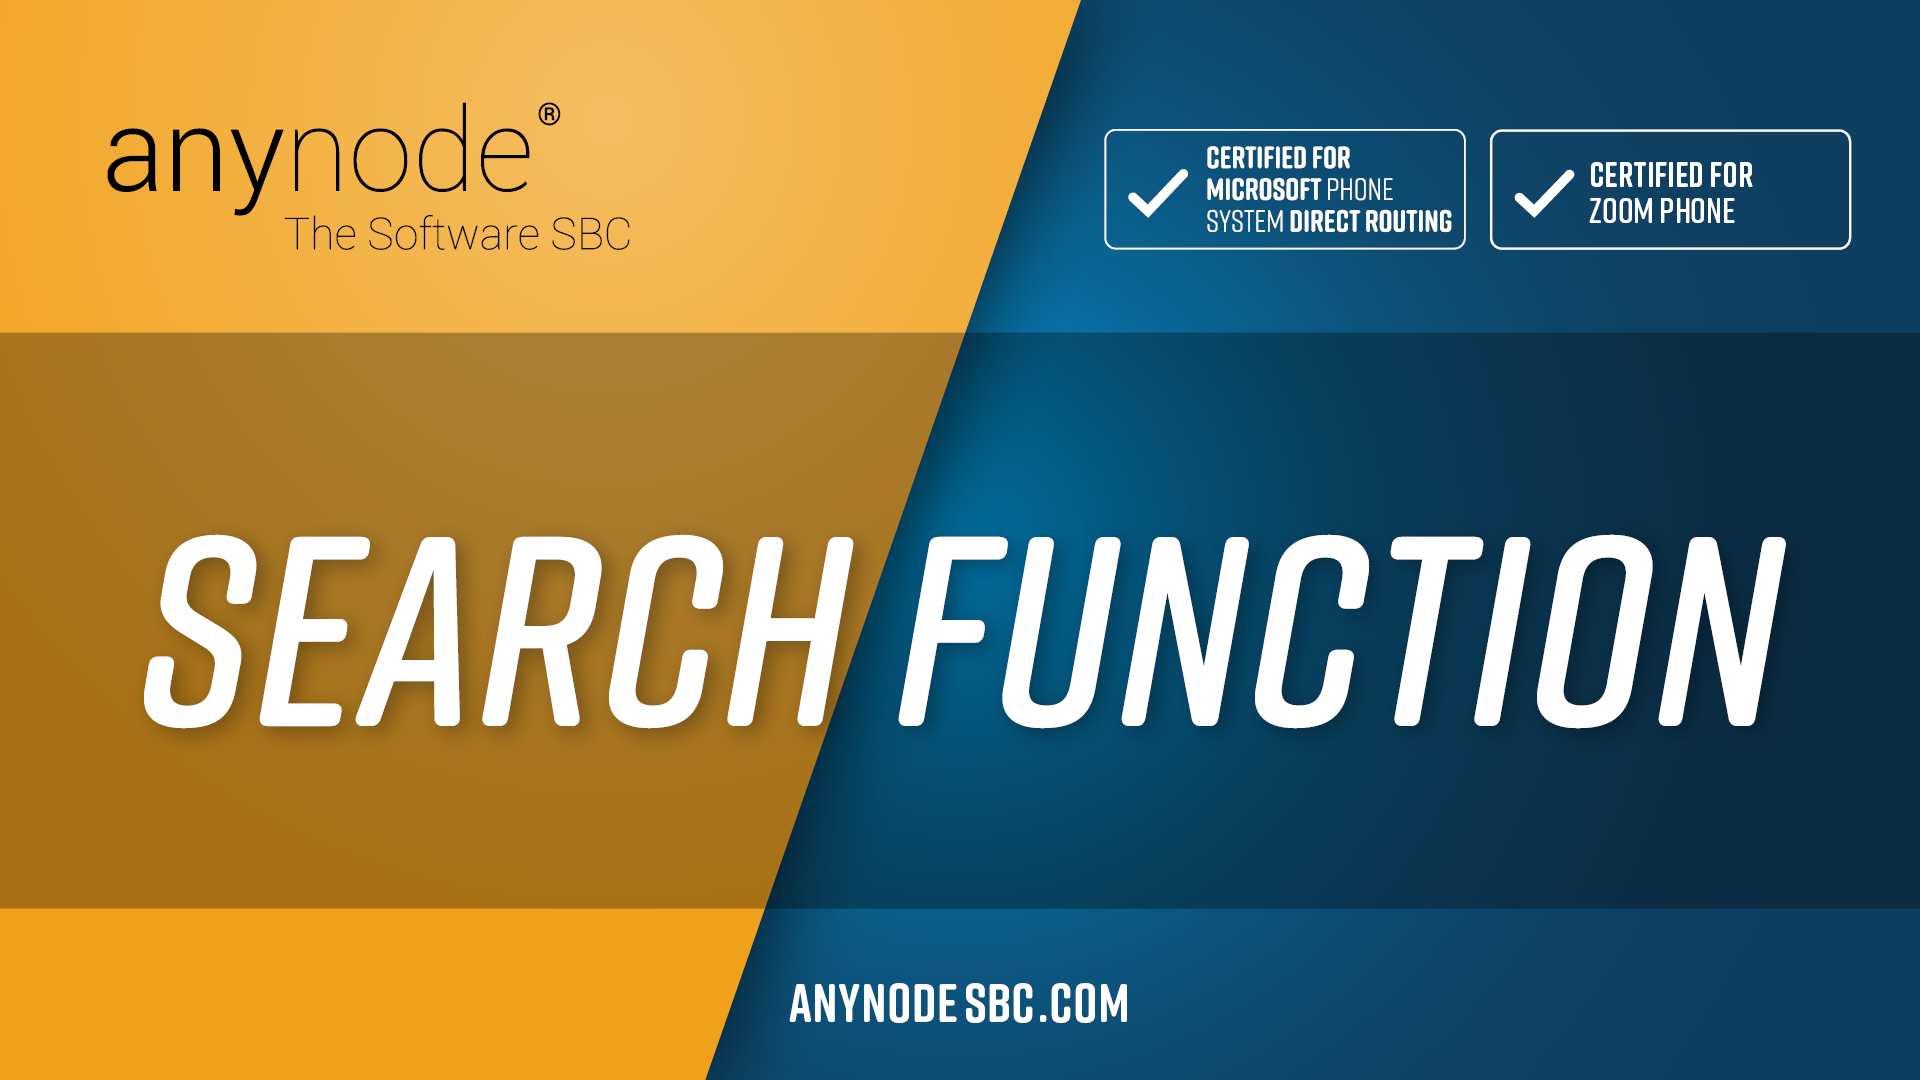 anynode_search